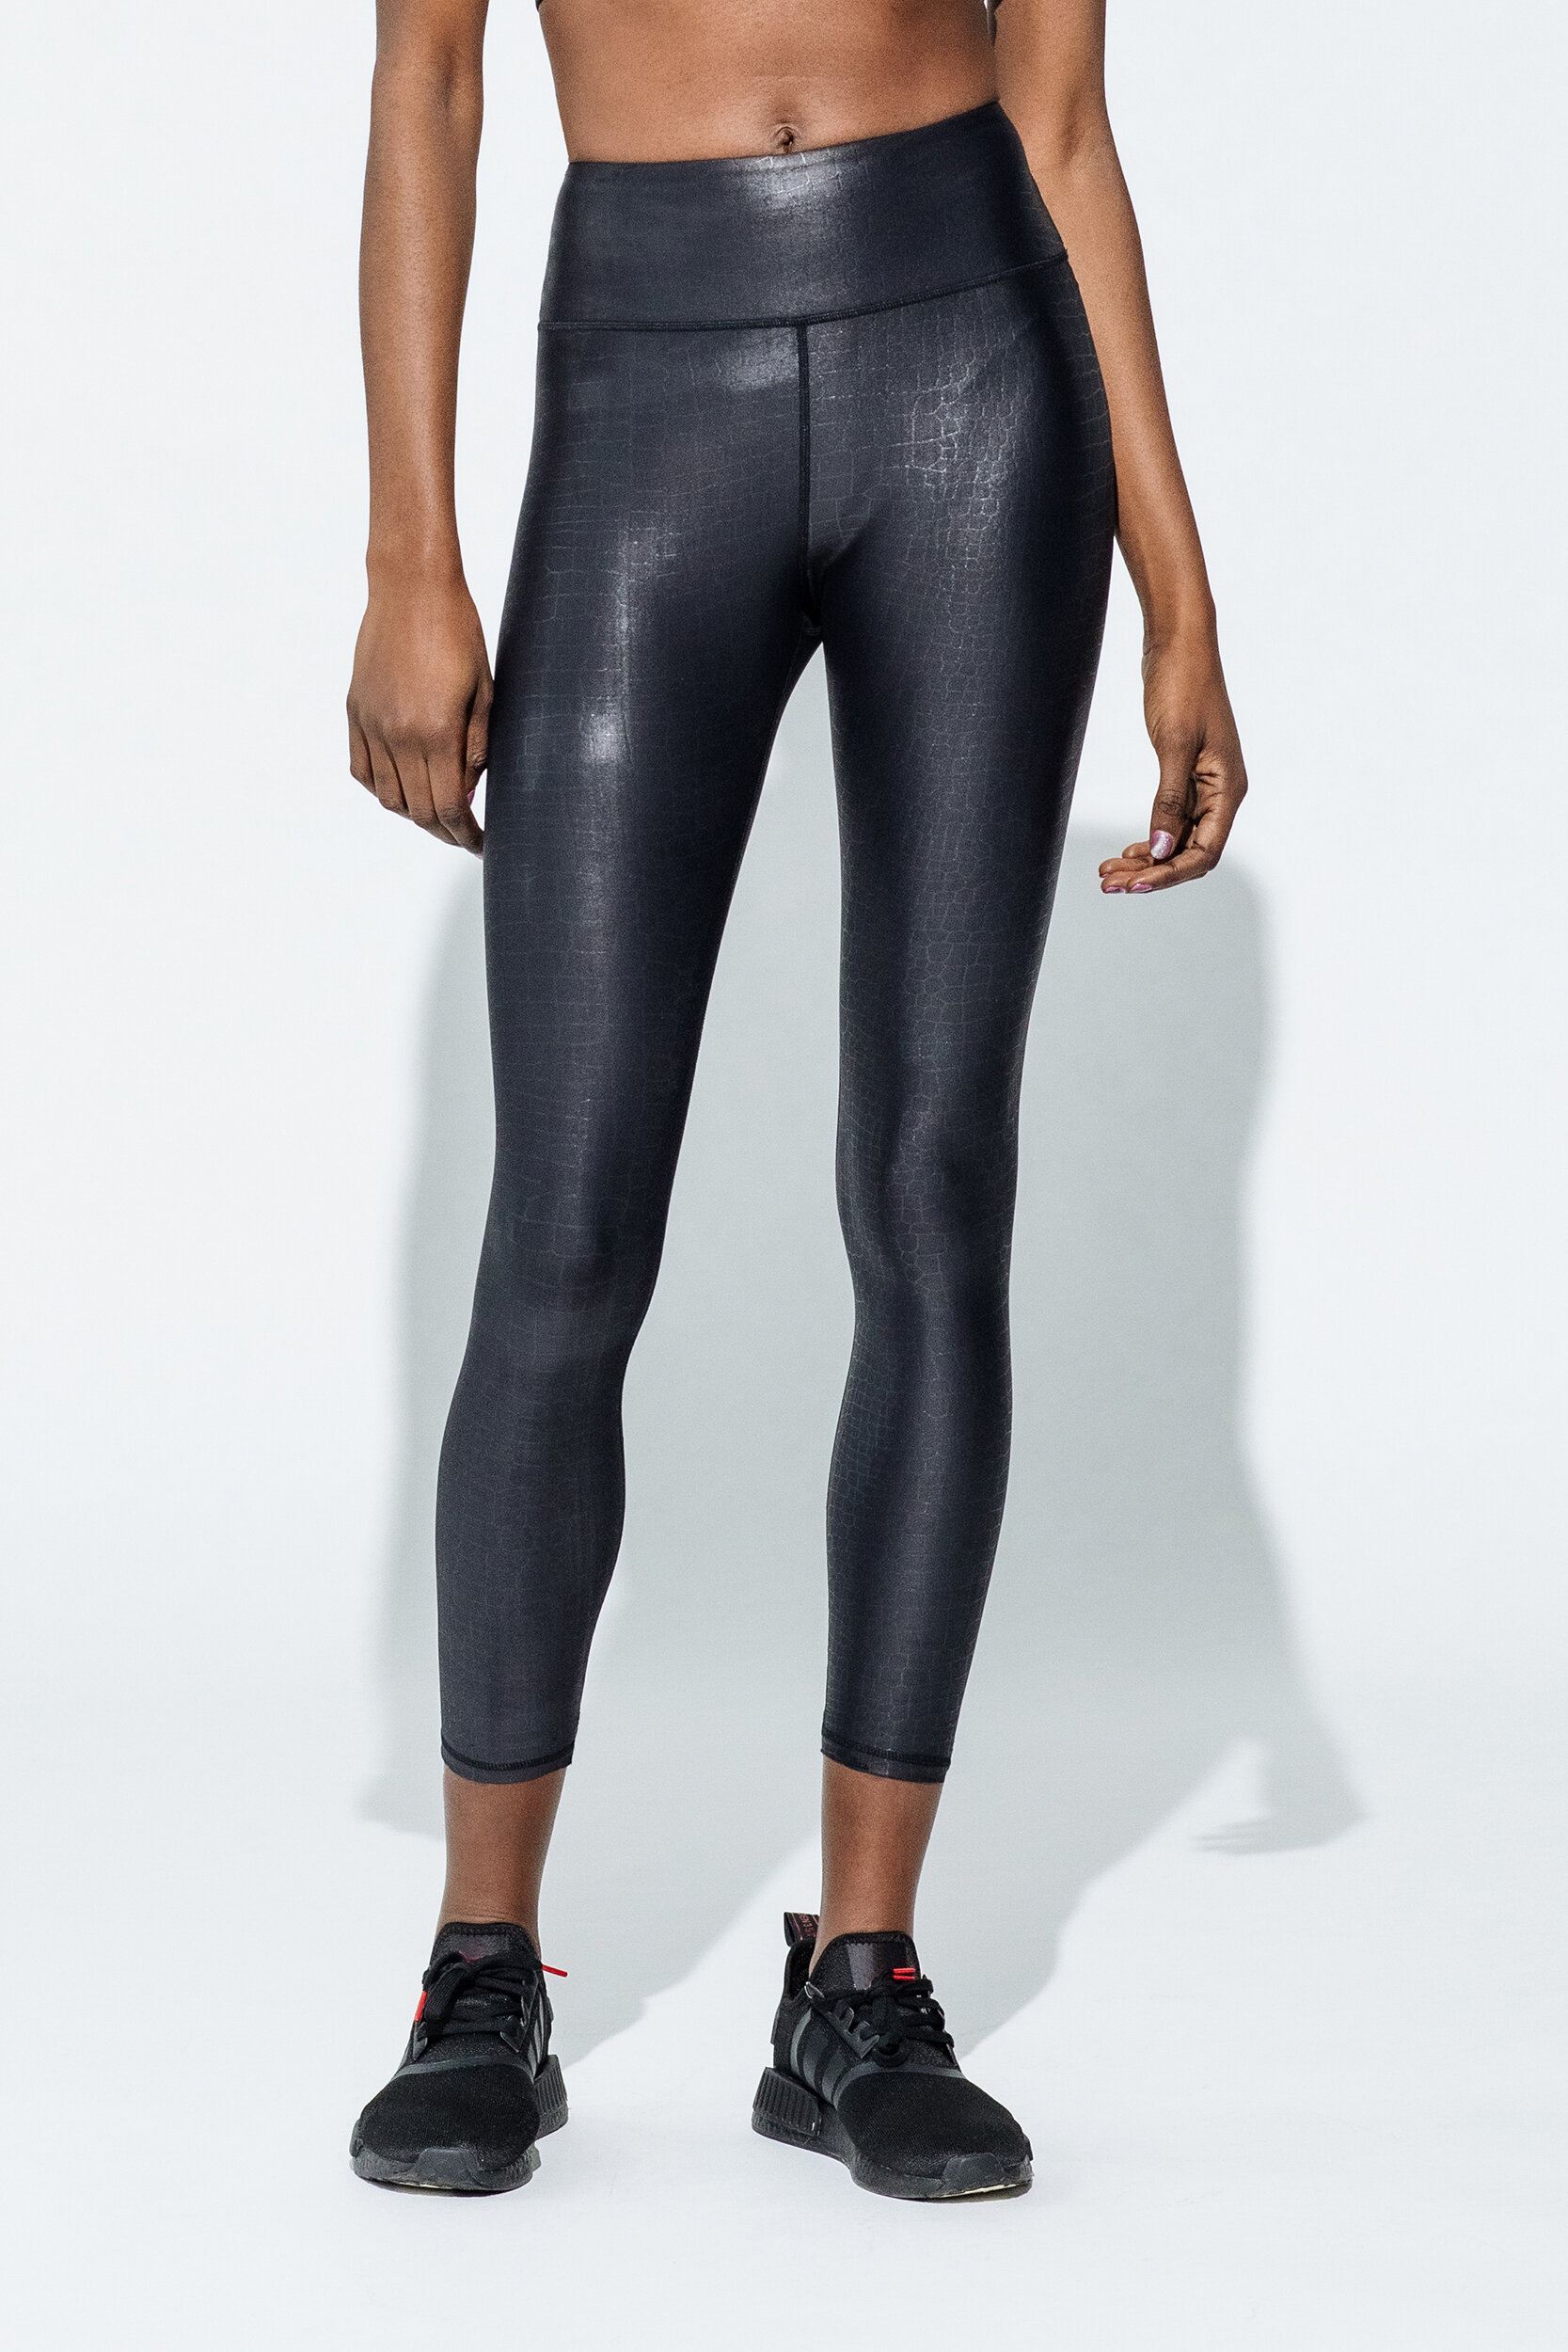 Buy Shiny Black Spandex Leggings With Jeans Back Pockets, by LENA QUIST  Online in India - Etsy